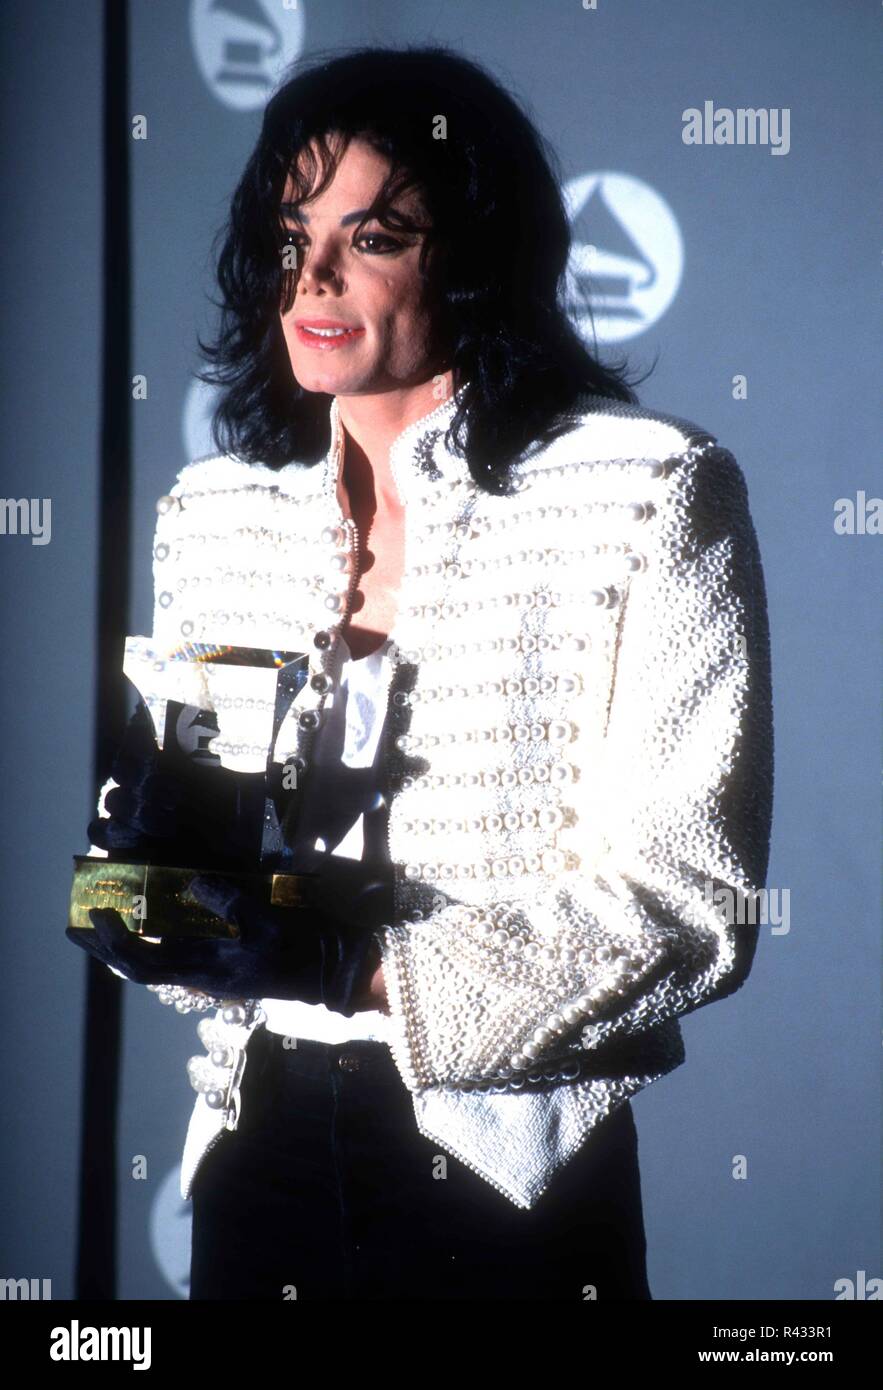 LOS ANGELES, CA - FEBRUARY 24: Singer Michael Jackson attends the 35th Annual Grammy Awards on February 24, 1993 at the Shrine Auditorium in Los Angeles, California. Photo by Barry King/Alamy Stock Photo Stock Photo